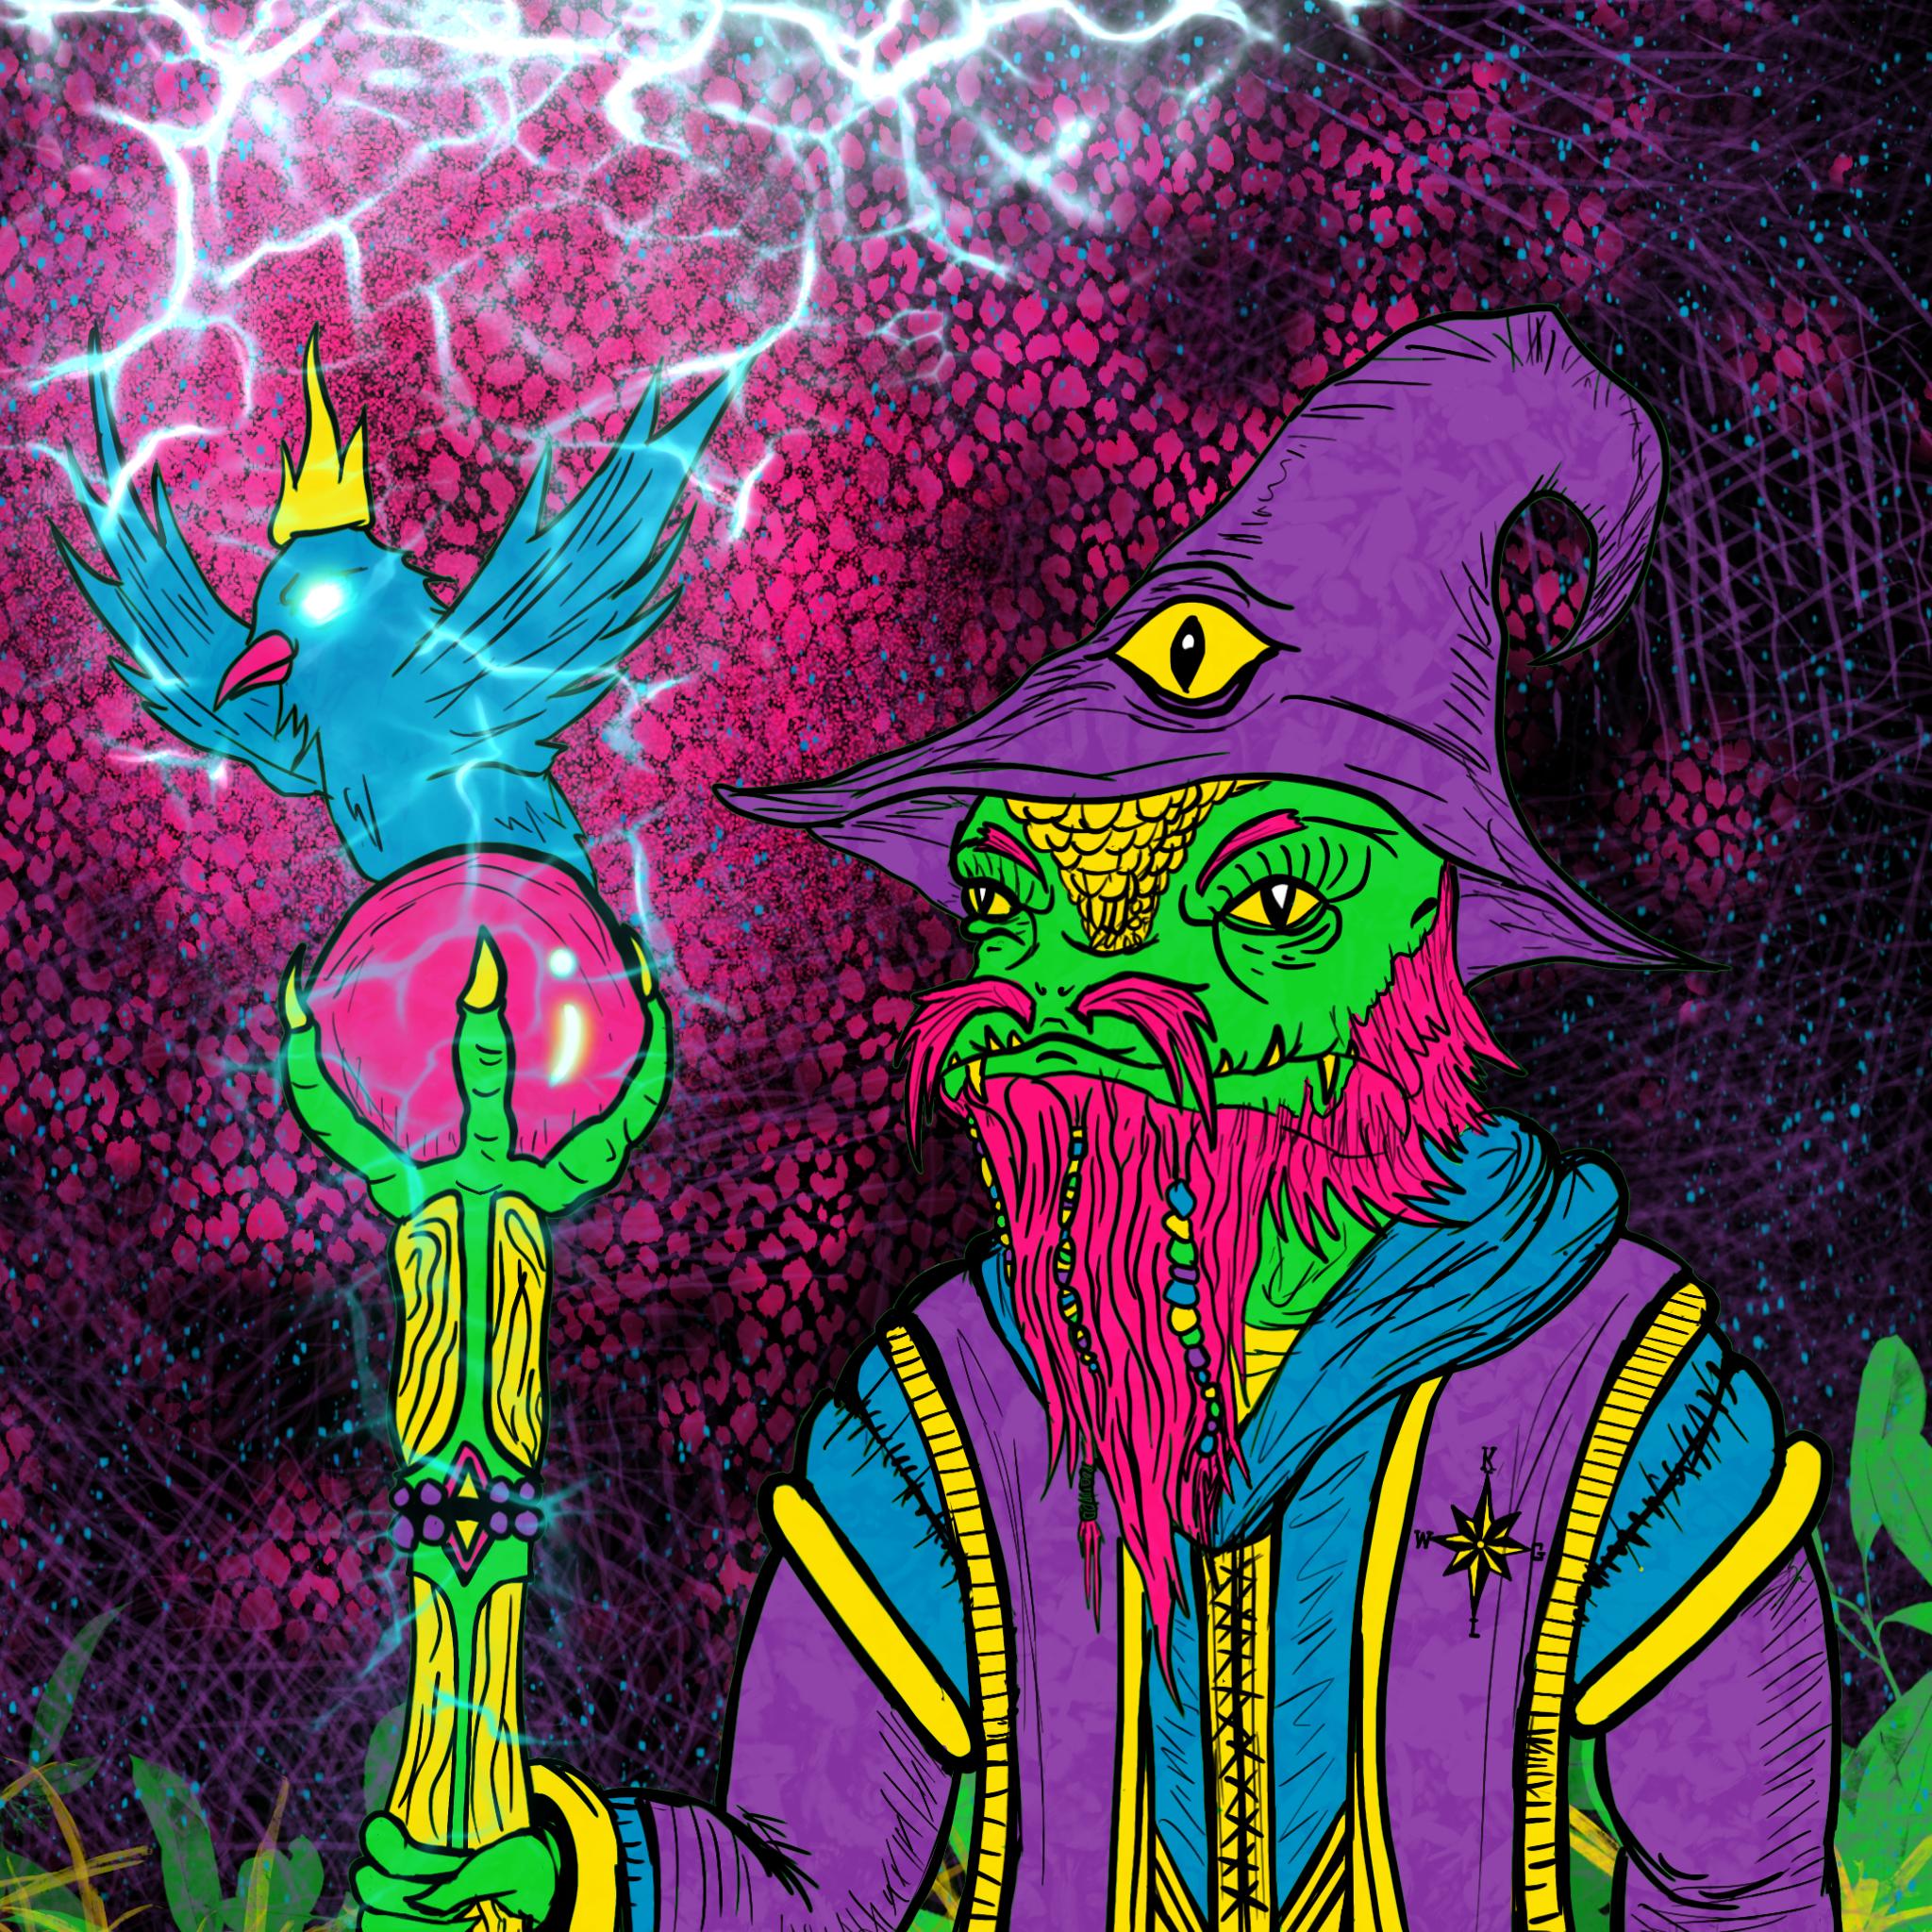 Illustration of a reptilian wizard holding a staff